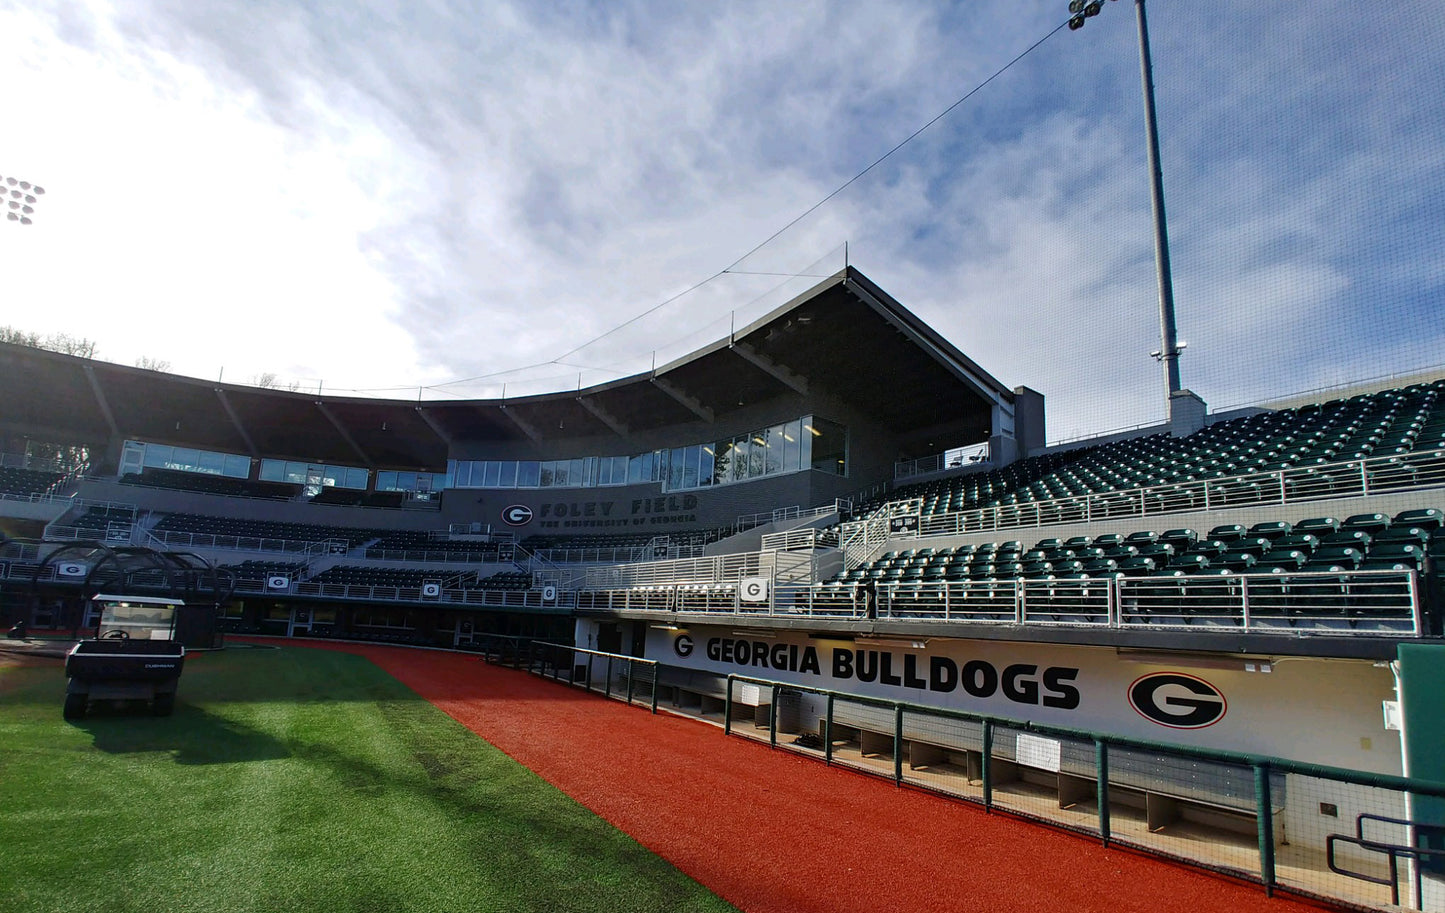 A baseball field with the bulldogs on it.